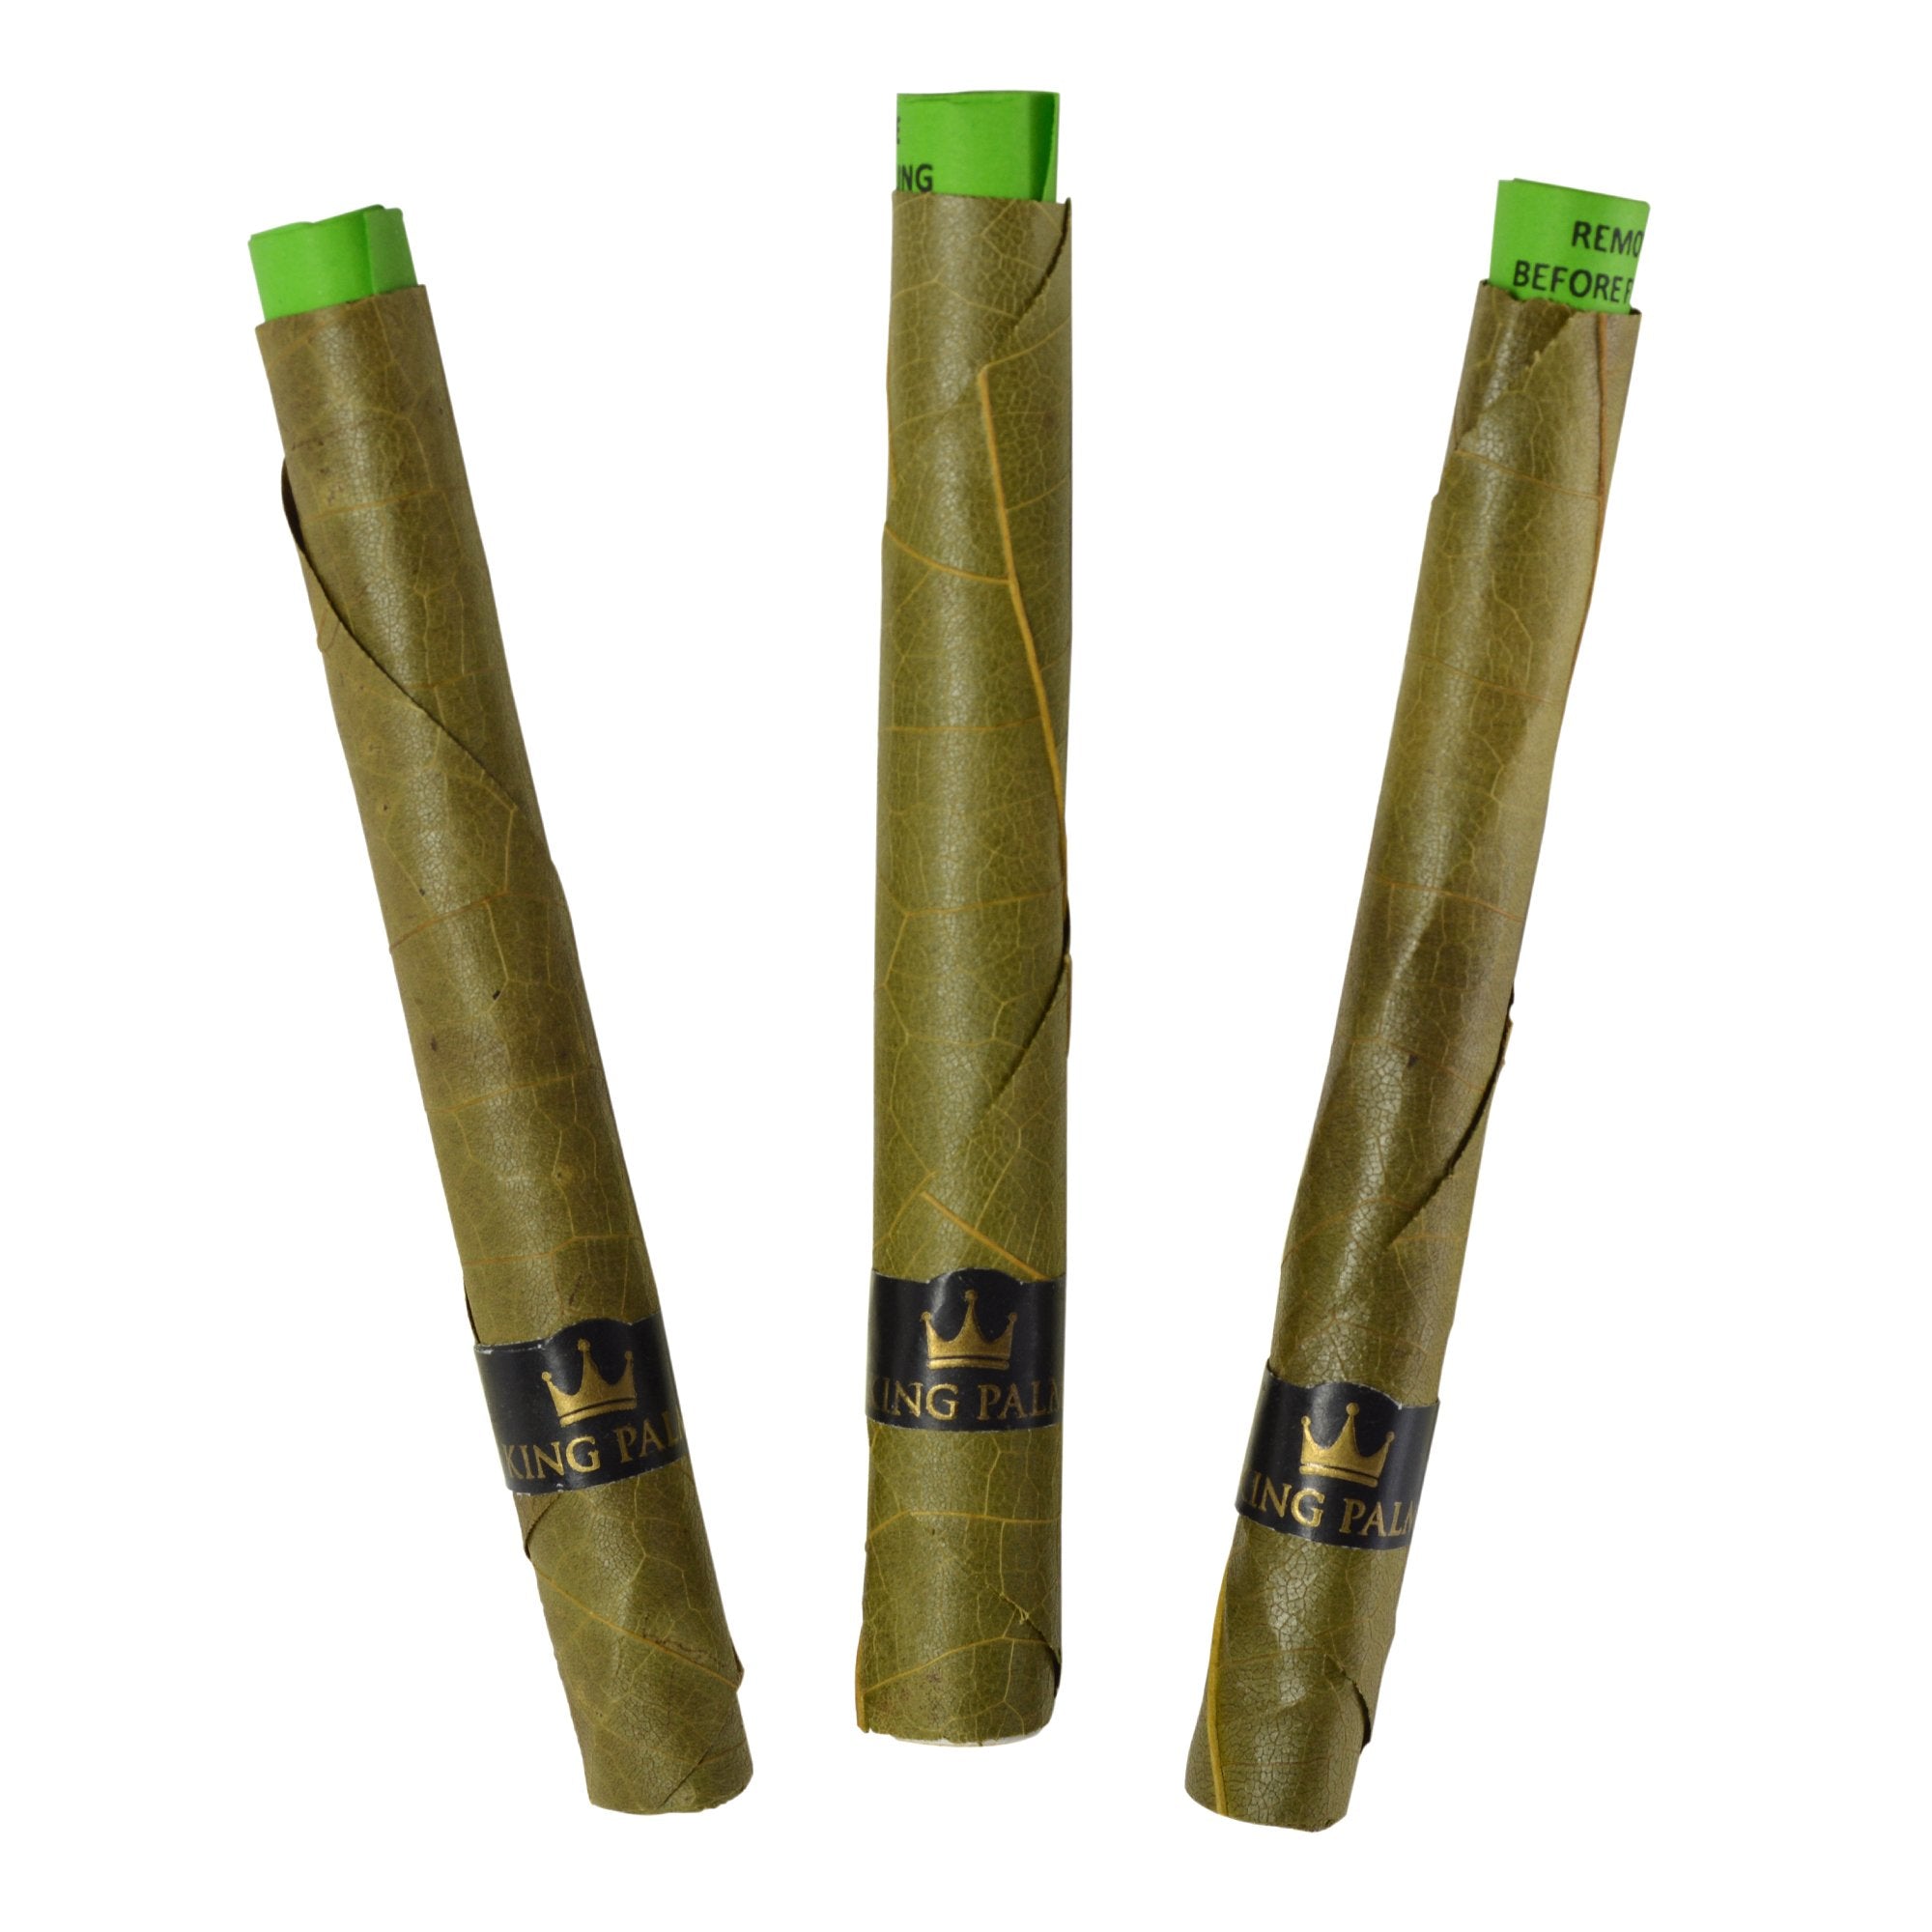 KING PALM | 'Retail Display' Mini Rolled Blunt Wrap Packs | 84mm - Natural Leaf - 8 Count - 3